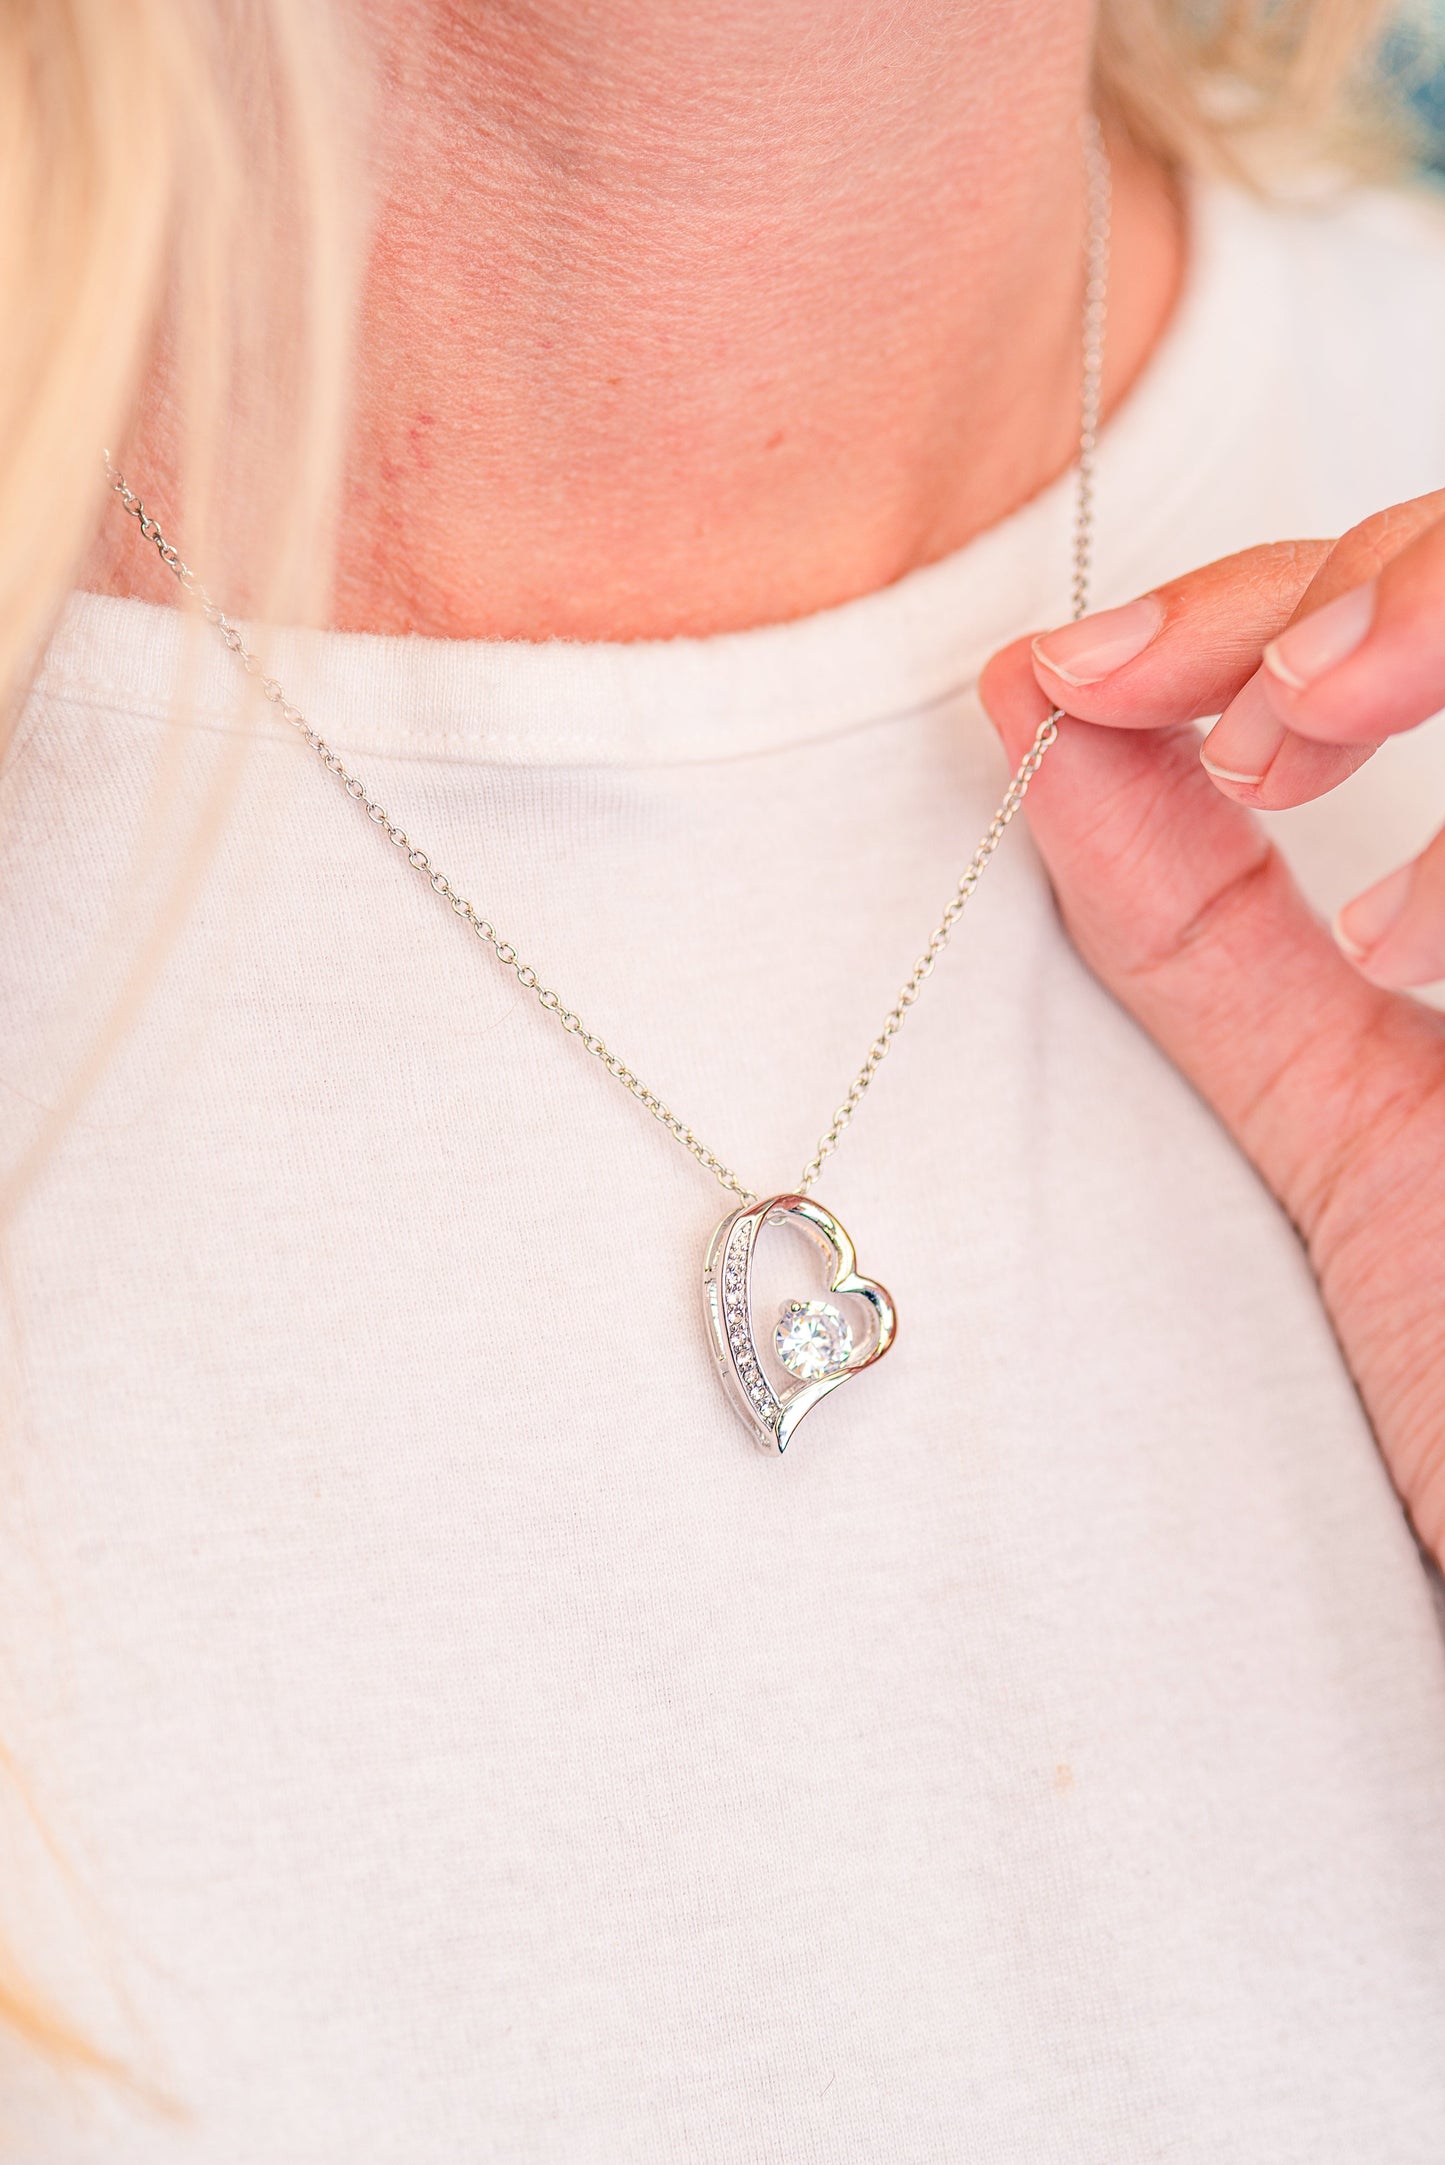 Mother's Day "All That I Am" Forever Love Necklace